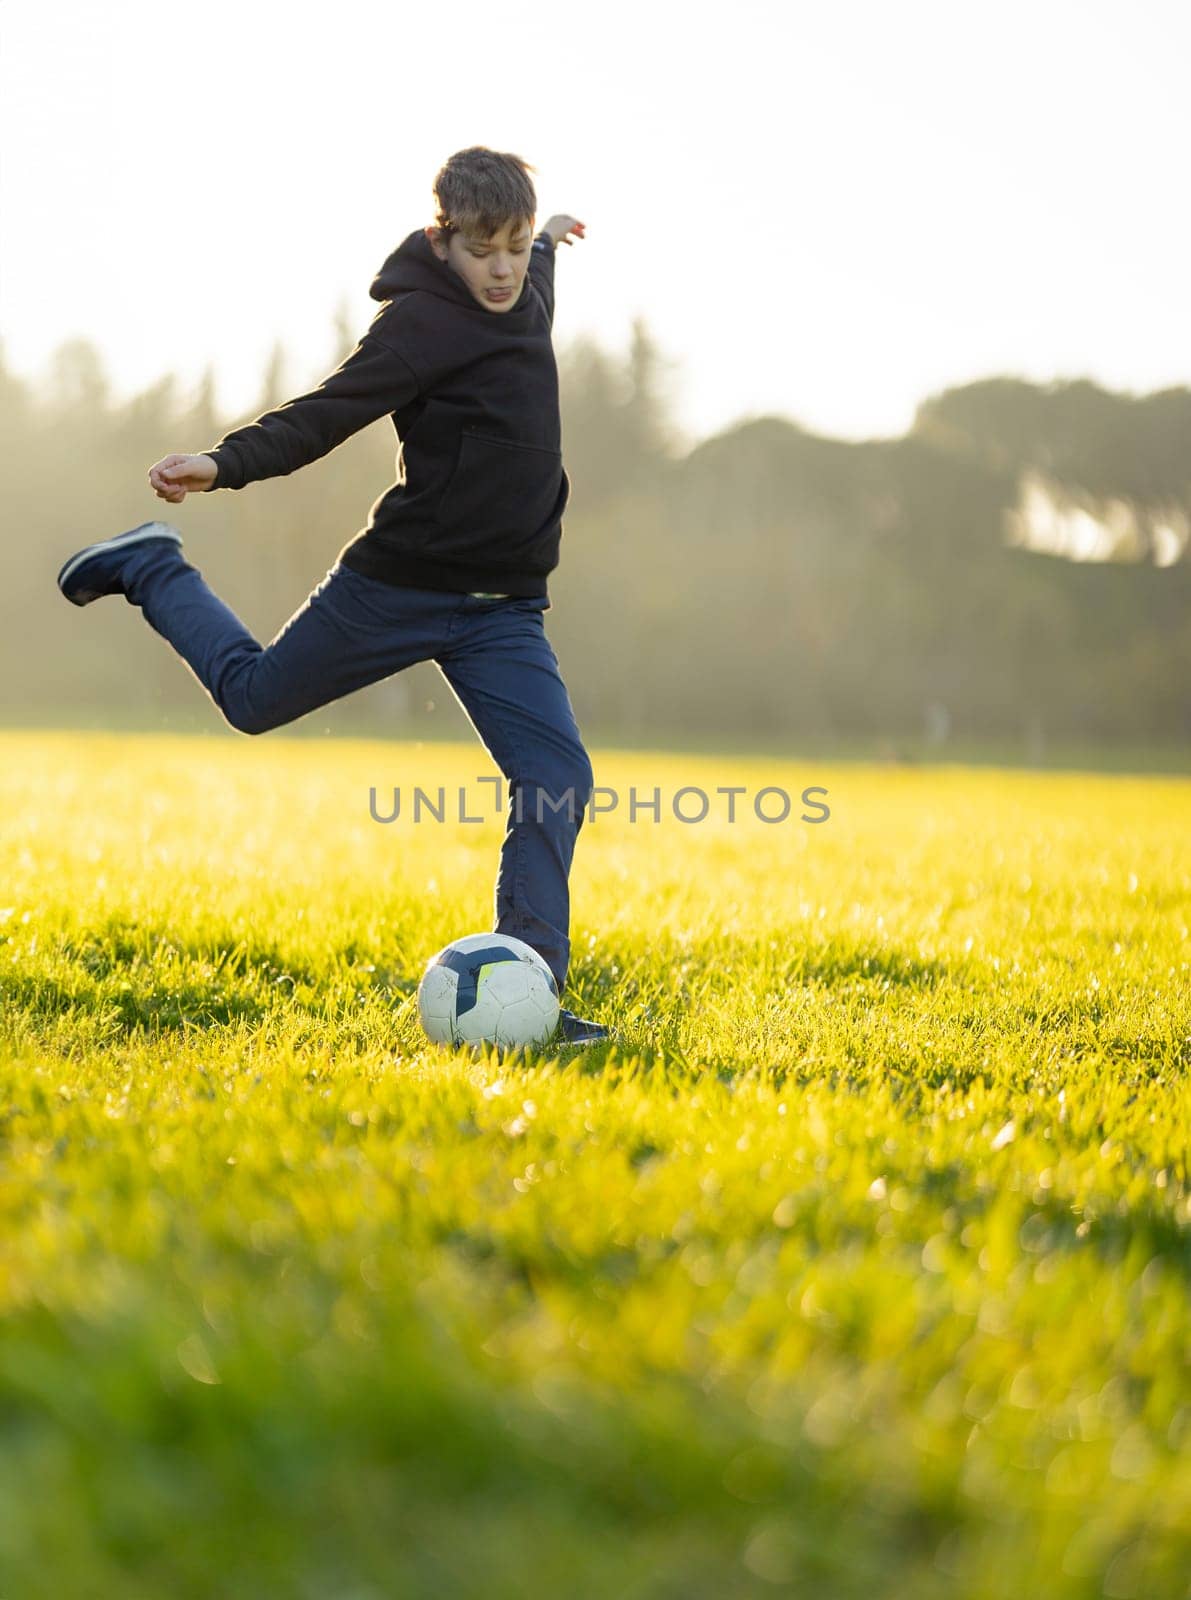 A boy kicks a soccer ball in a field. The boy is wearing a black hoodie and blue jeans